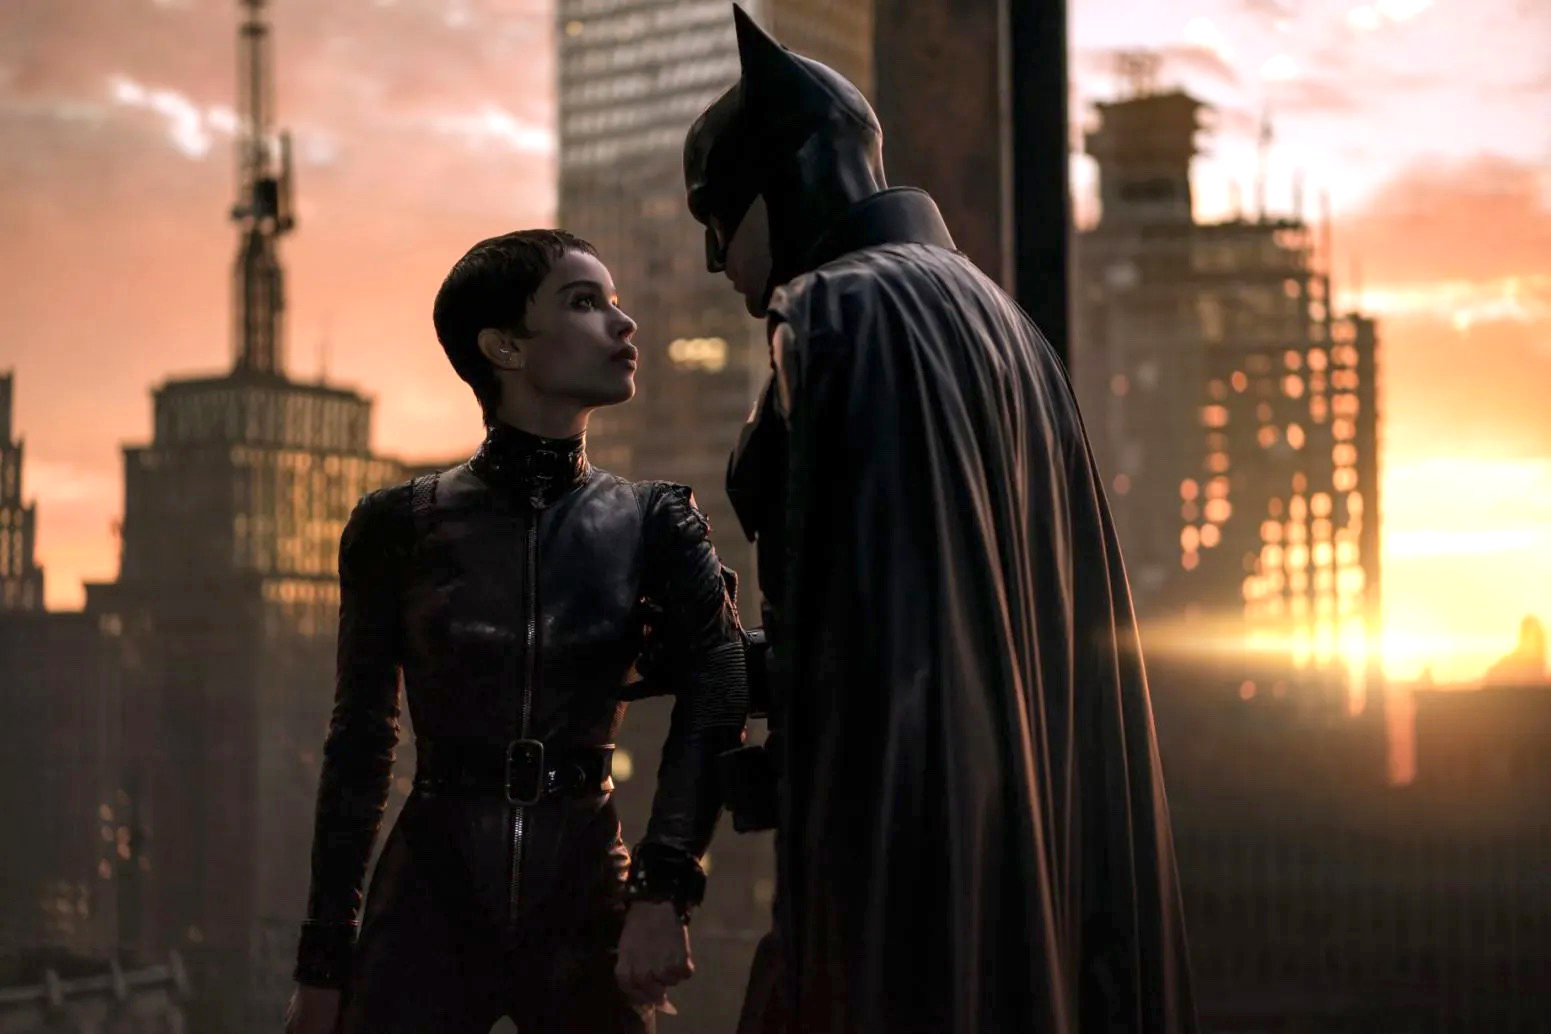 Movie Review: The Caped Crusader lurks in the shadows in 'The Batman'. TBR News Media